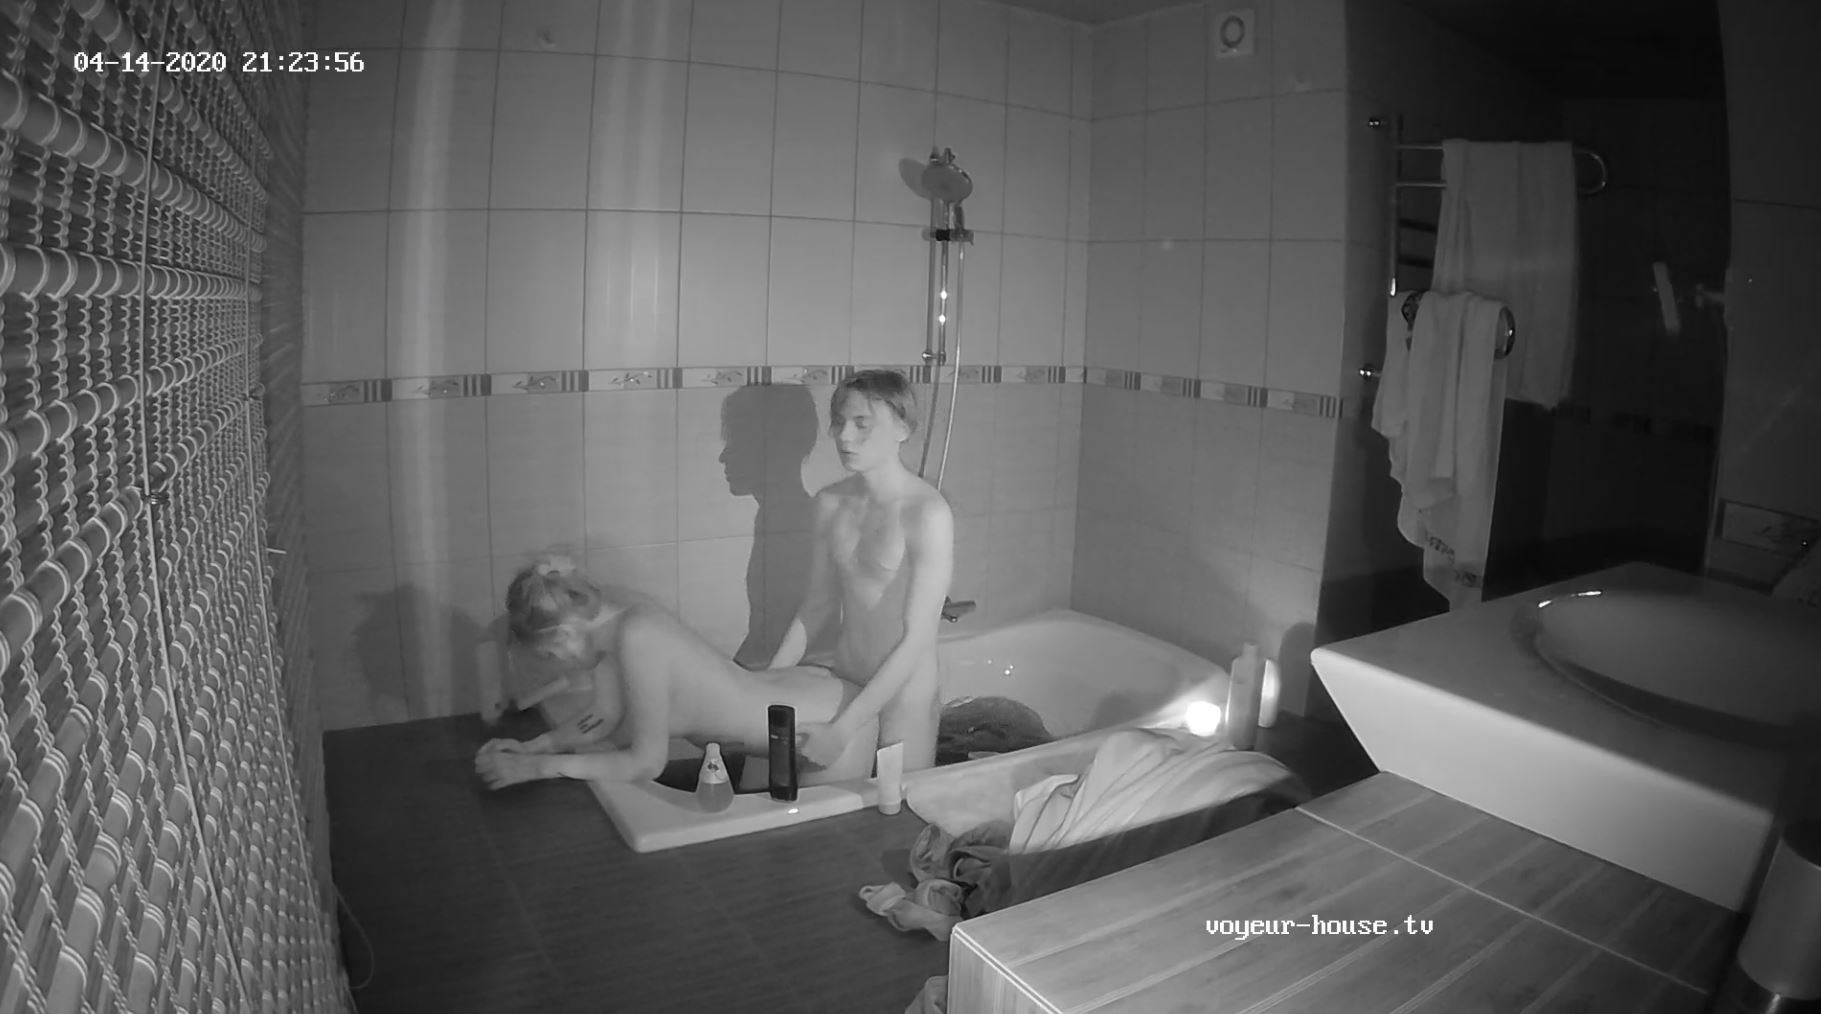 Watch Shower girl Guest couple bath and sex in the dark, Apr14/20 Naked people with Ian and Deborah in Bathroom The biggest Voyeur Videos gallery